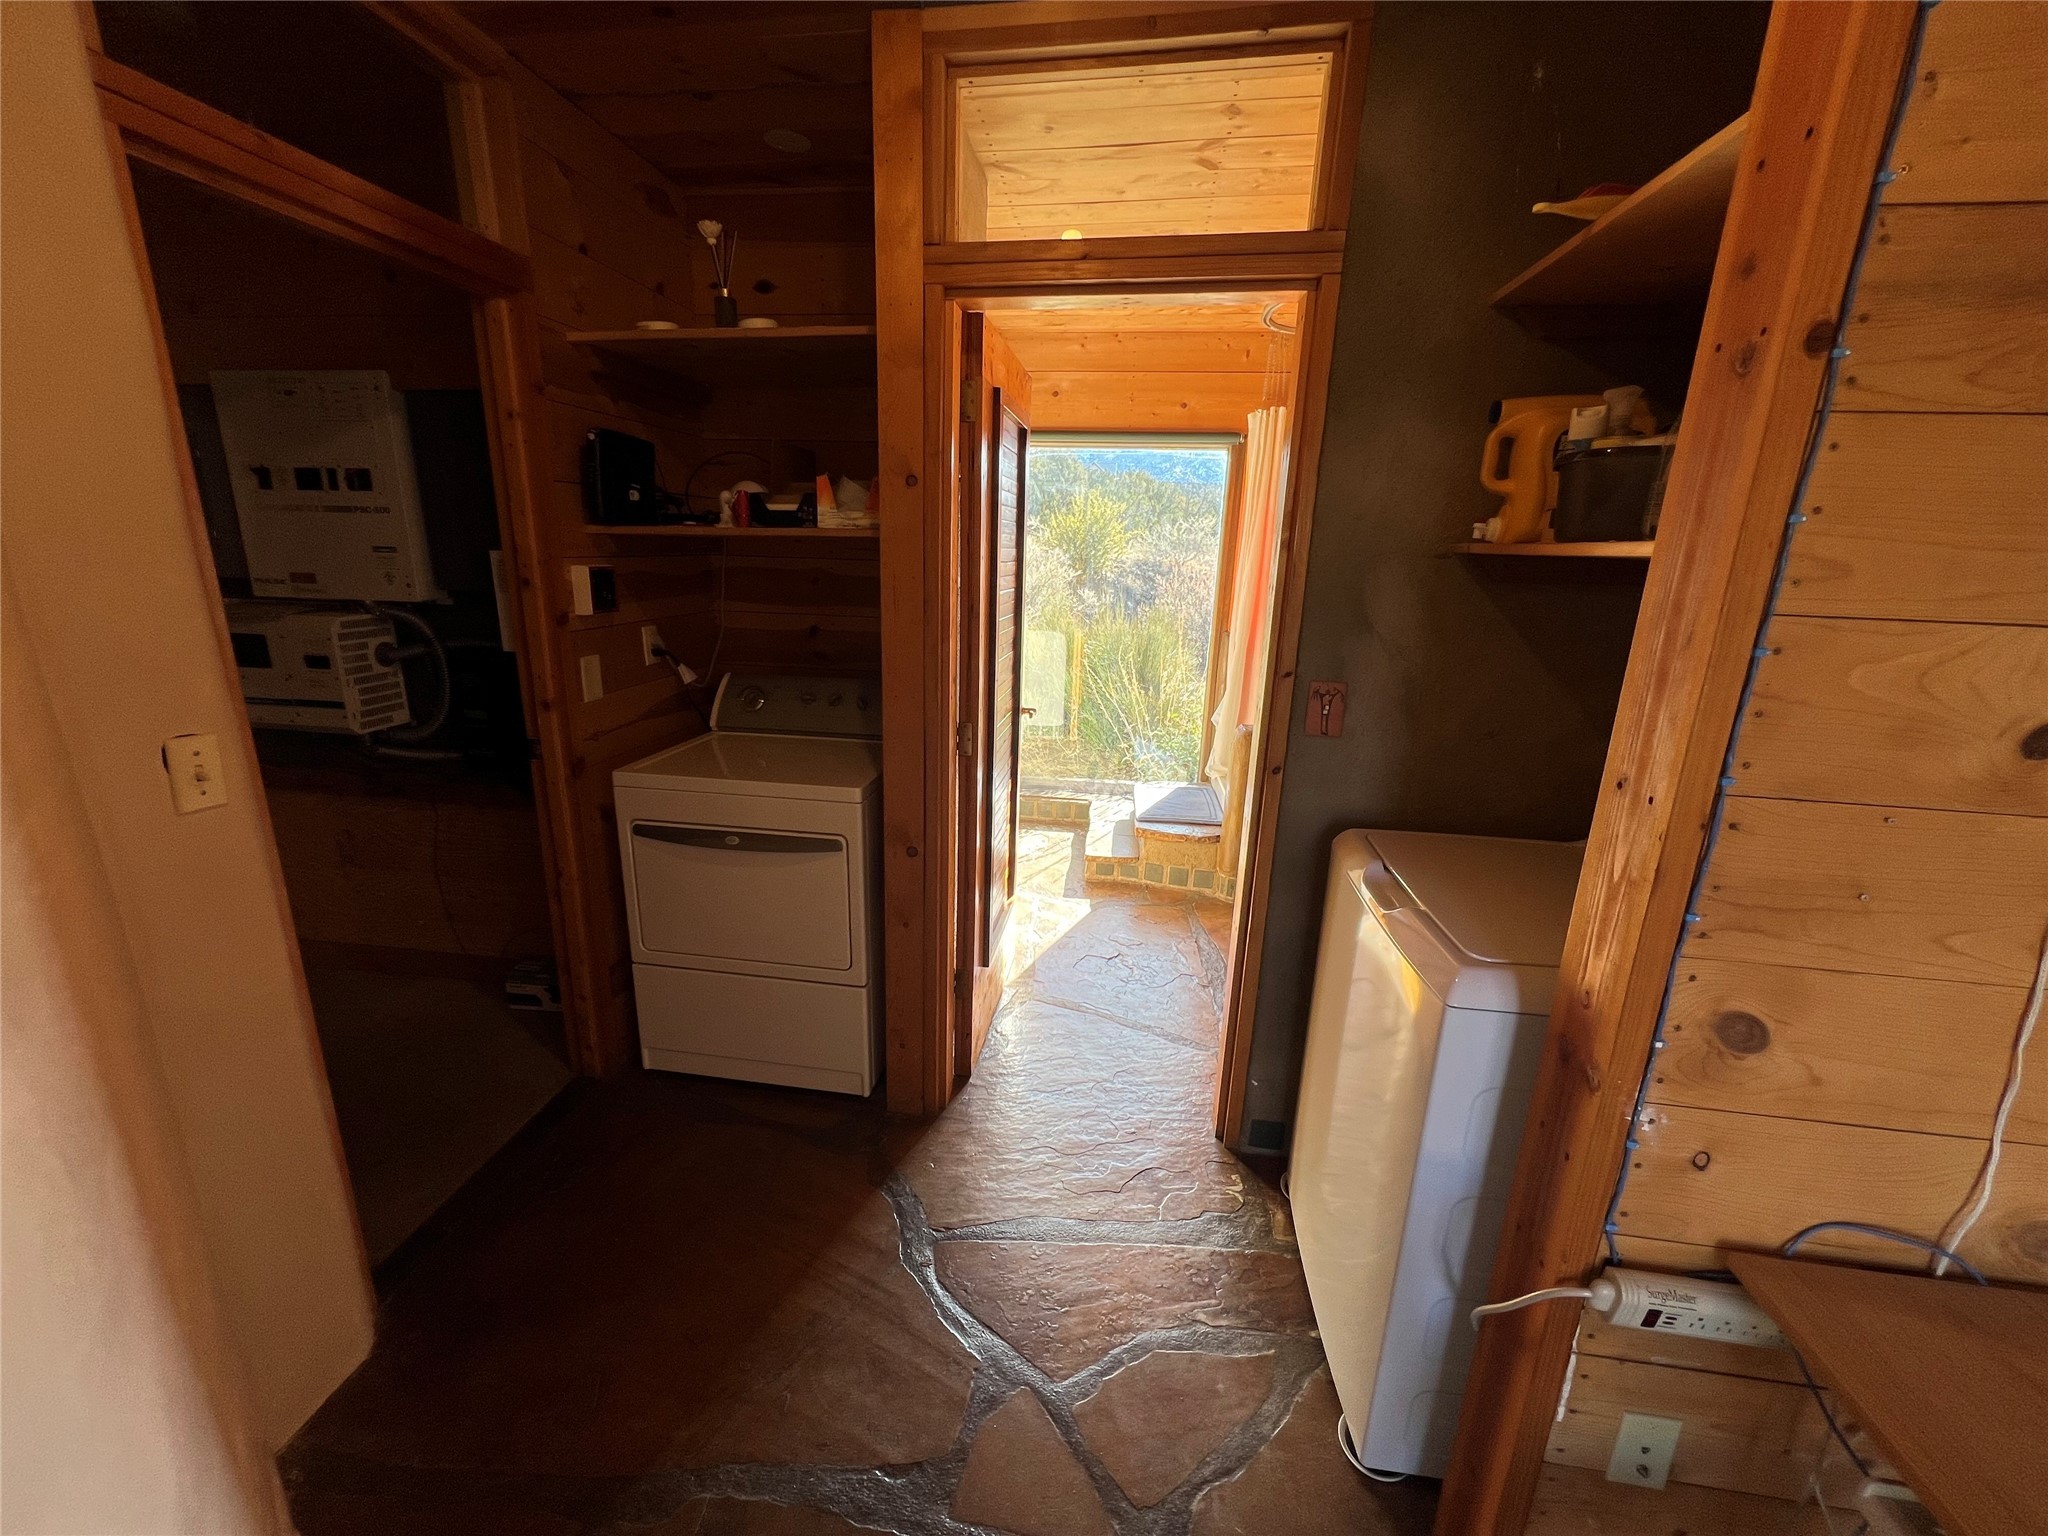 66 old windmill rd, Madrid, New Mexico 87010, 2 Bedrooms Bedrooms, ,2 BathroomsBathrooms,Residential,For Sale,66 old windmill rd,202342143